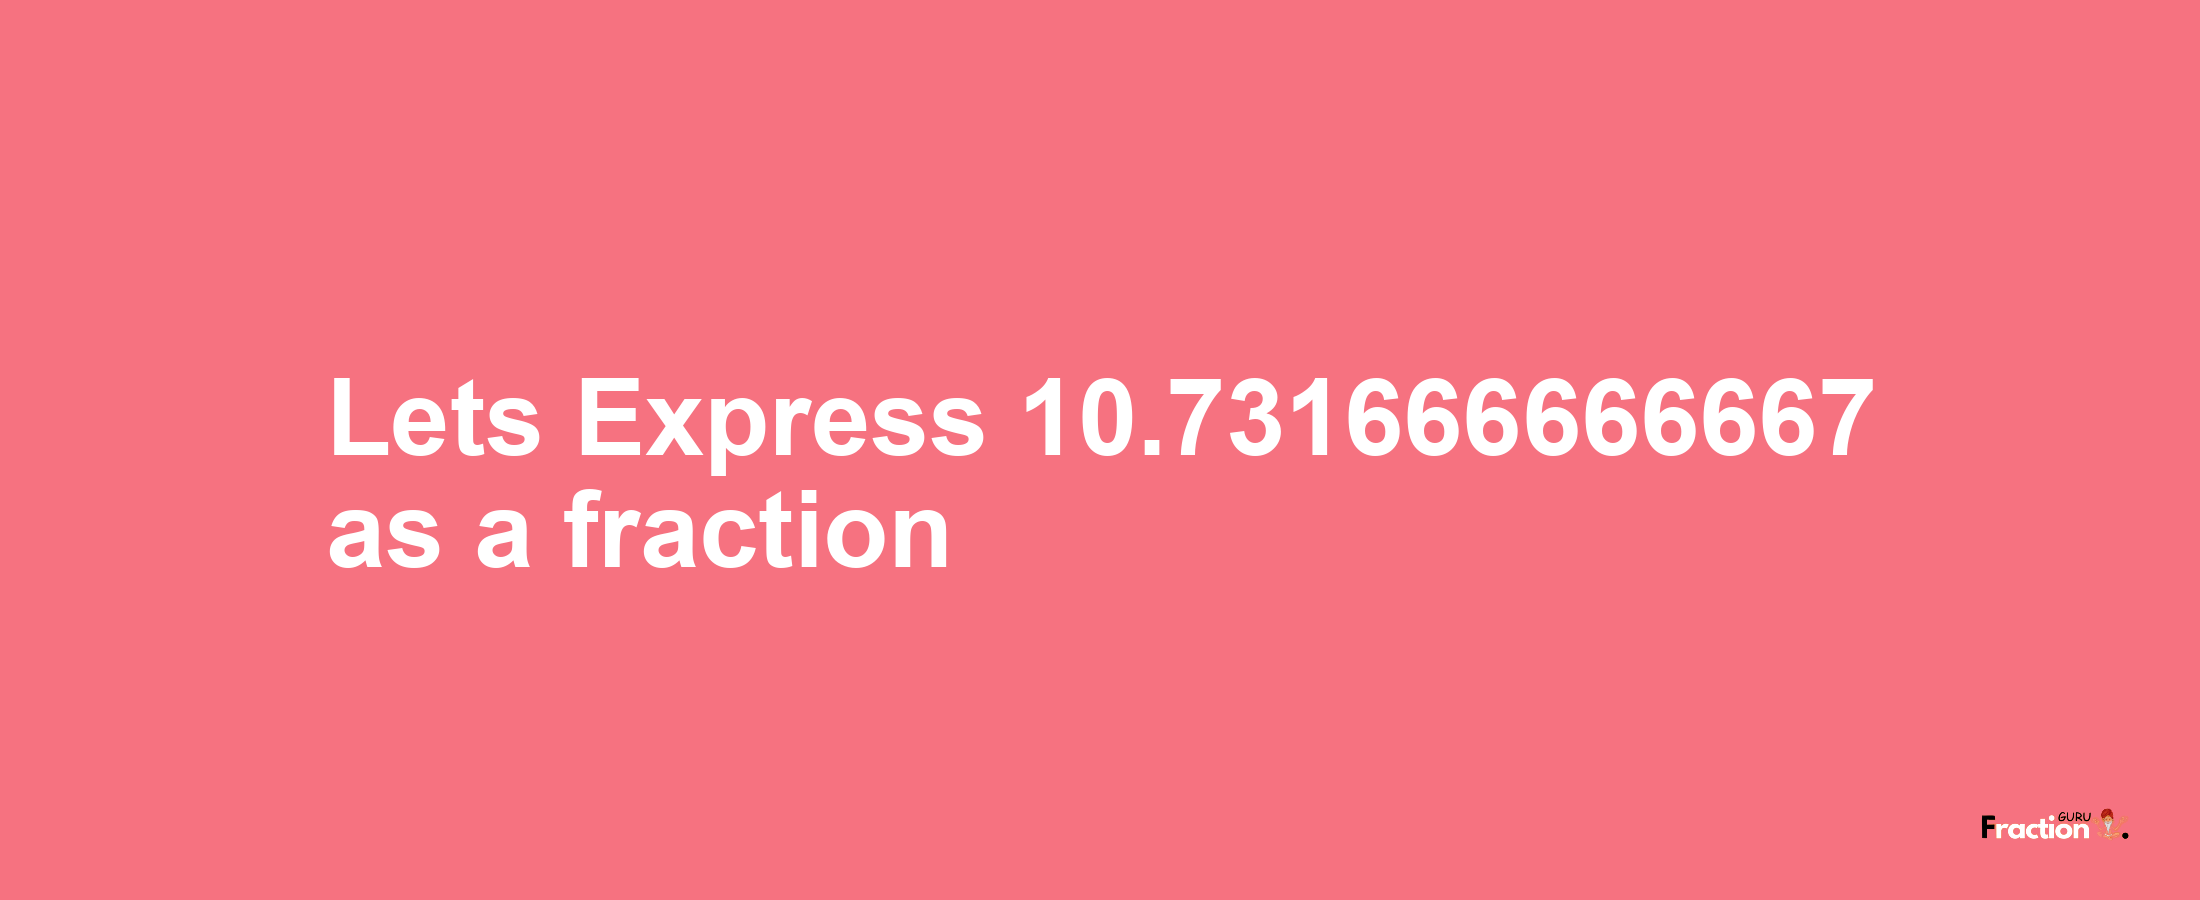 Lets Express 10.731666666667 as afraction